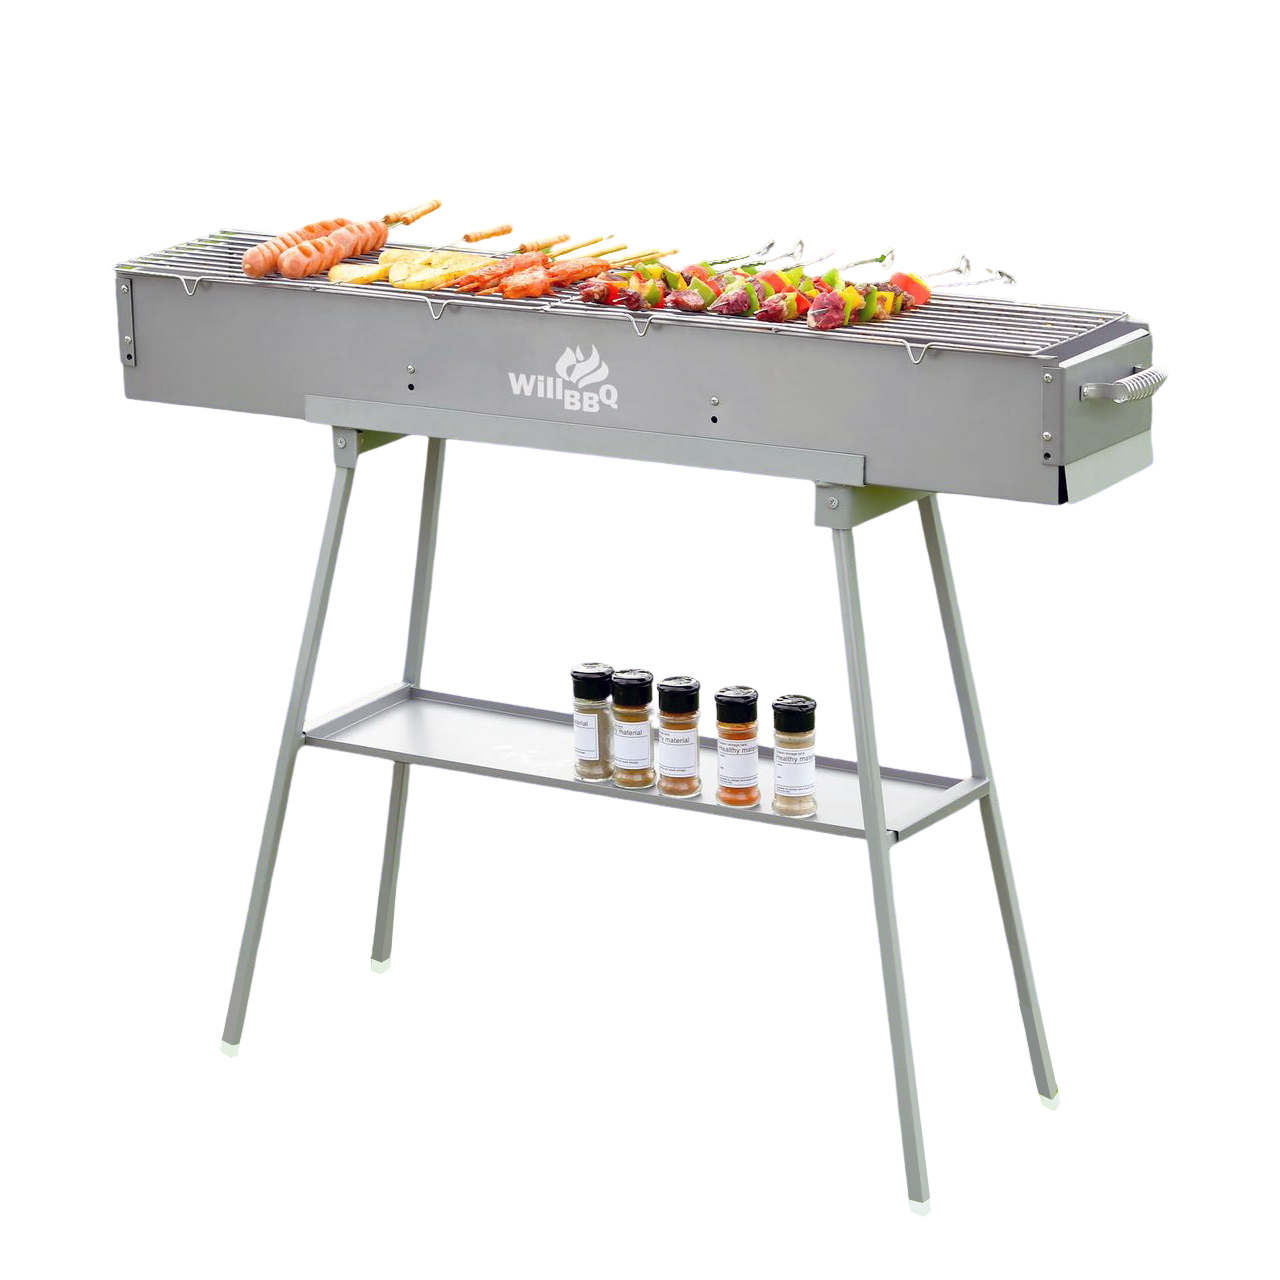 100cm x 18cm Commercial Quality Portable Charcoal Hibachi BBQ Camping Barbecue Grill